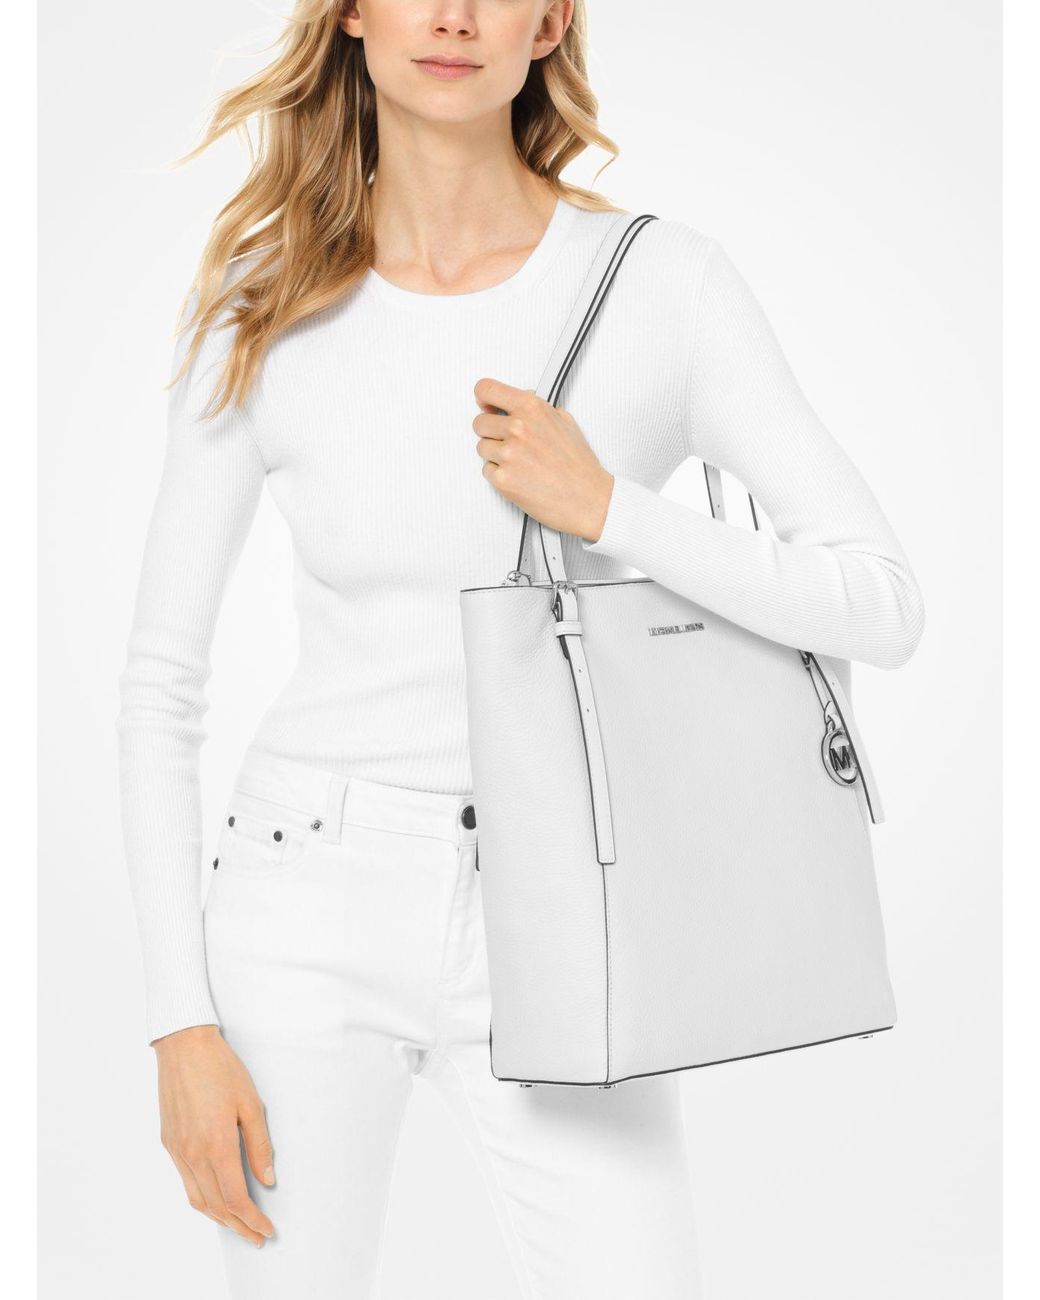 MICHAEL Michael Kors Megan Large Pebbled Leather Tote Bag in White | Lyst